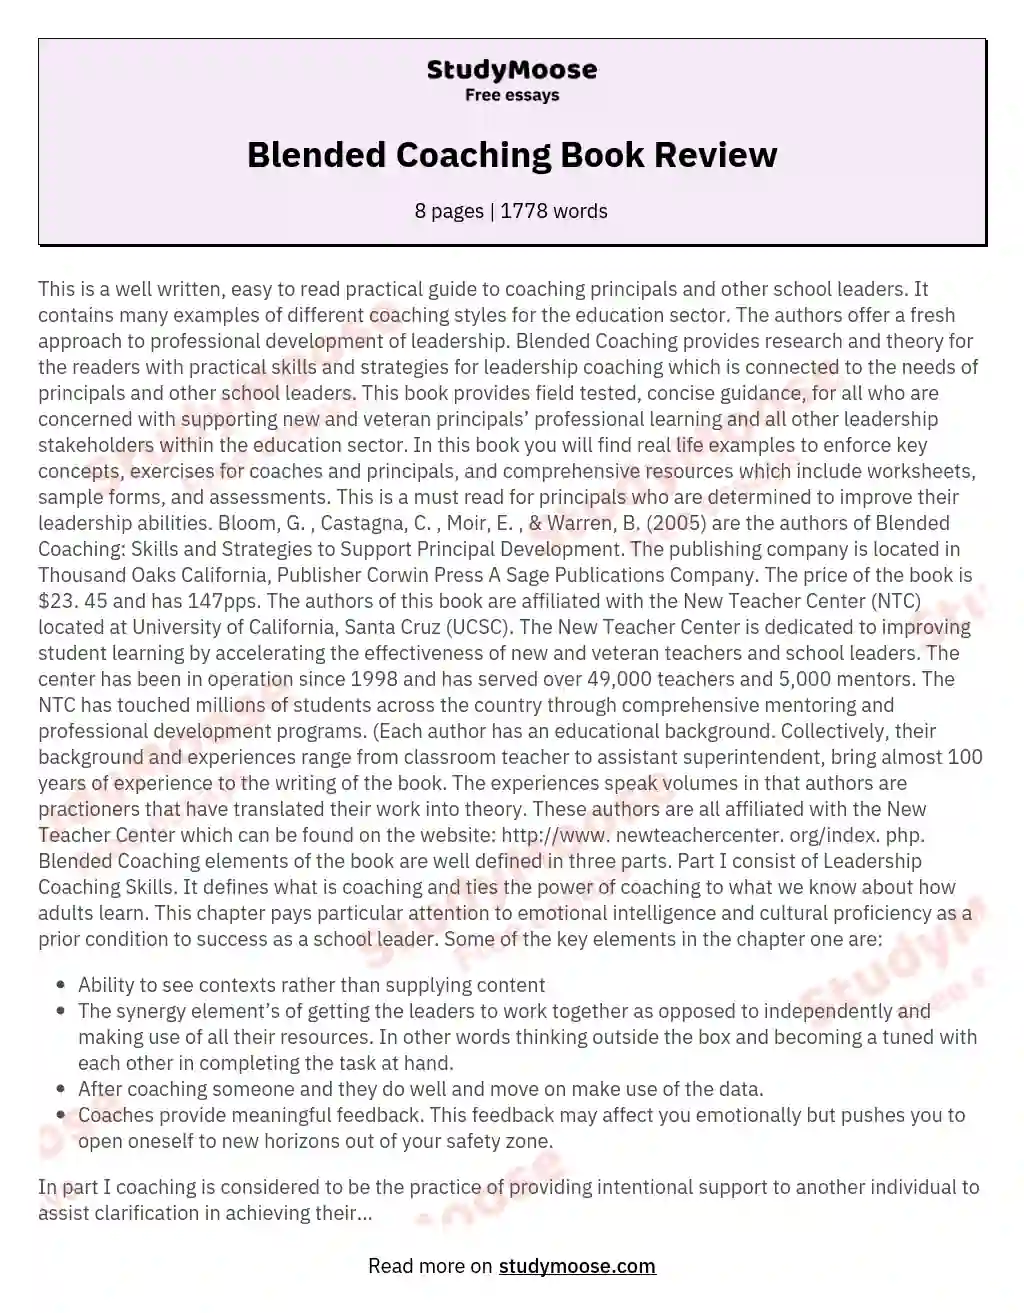 Blended Coaching Book Review essay